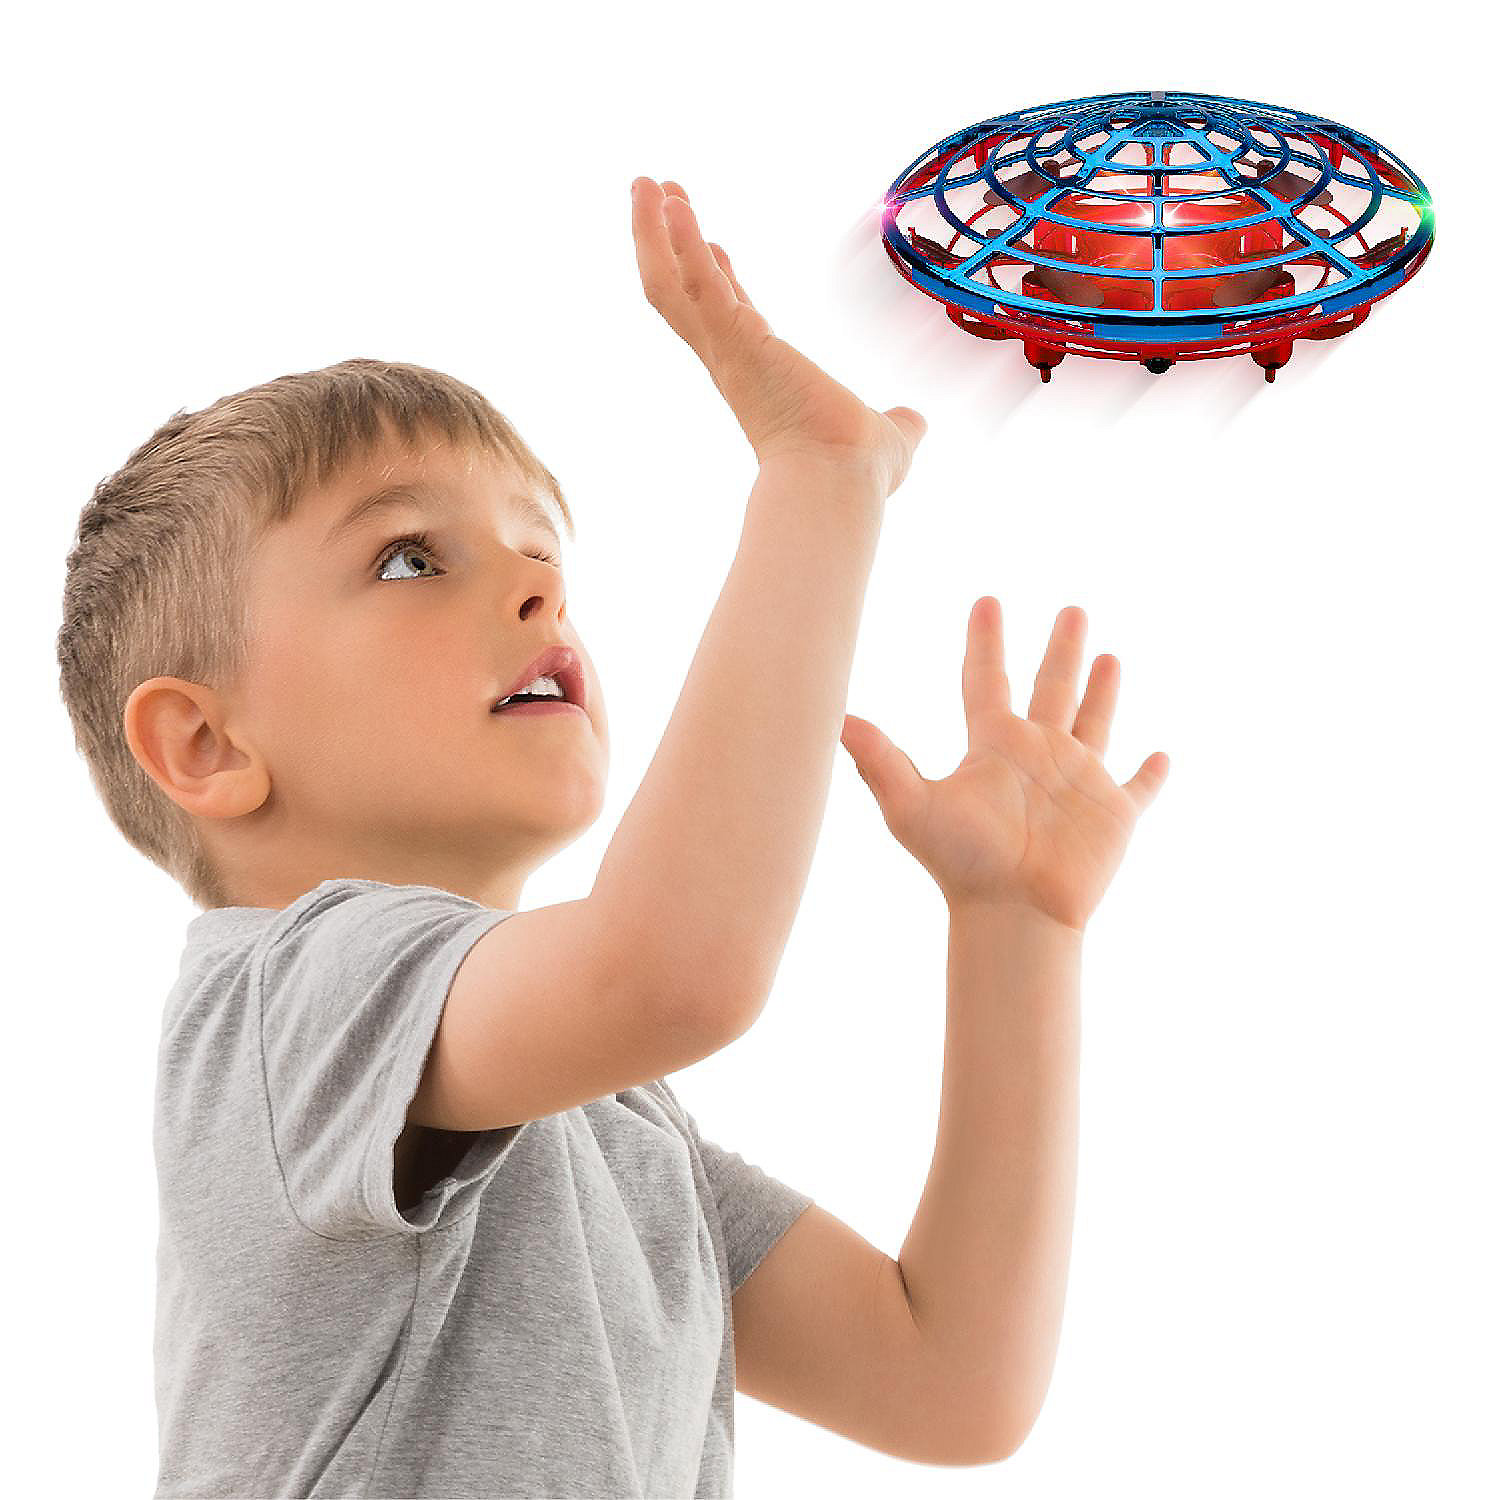 Hands Motion Mini Drone, Easy Indoor Rechargeable UFO Flying Drone Toy | Oriental Trading